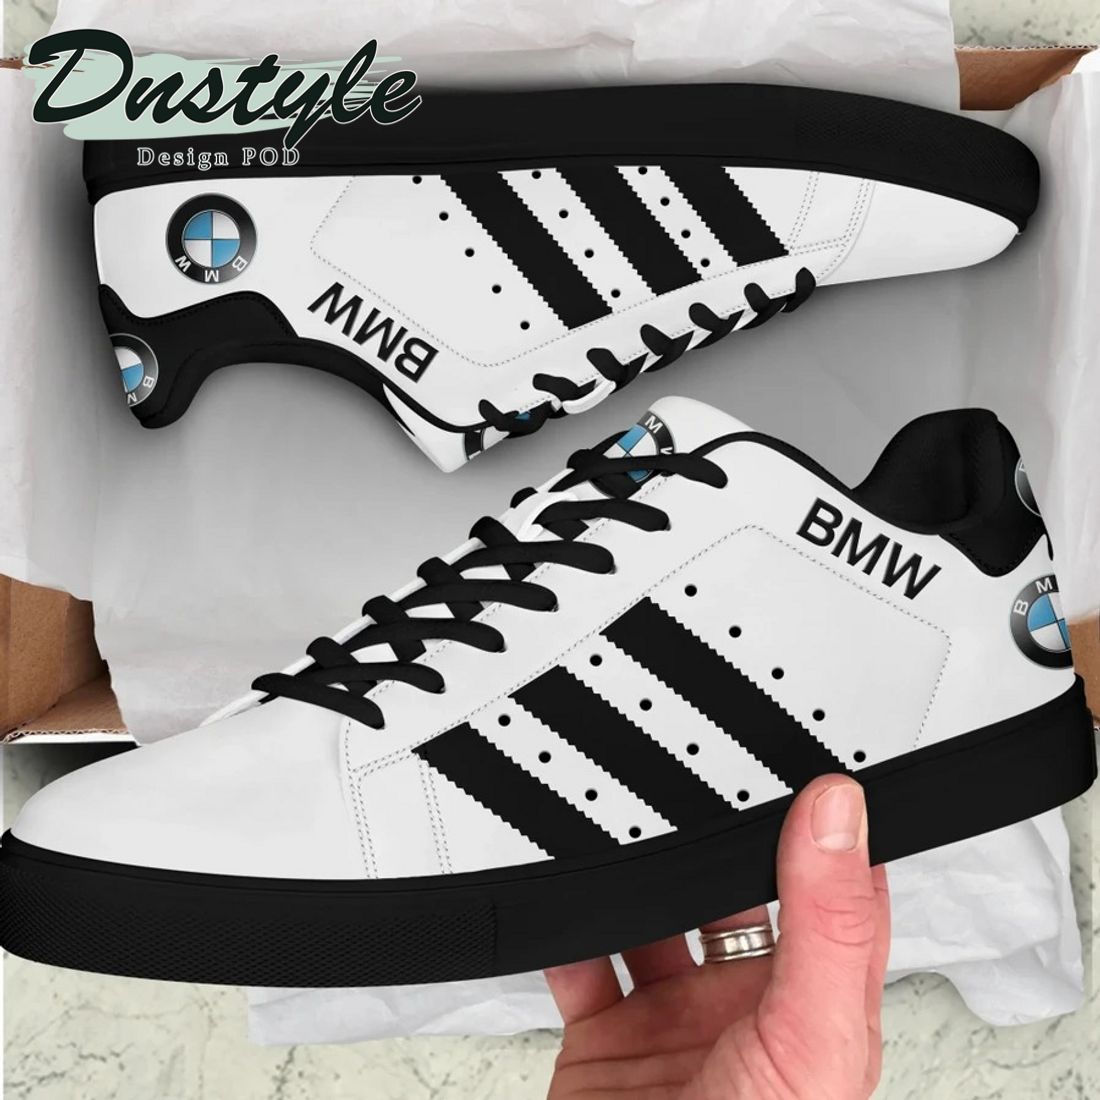 Blink-182 adidas stan smith trainers